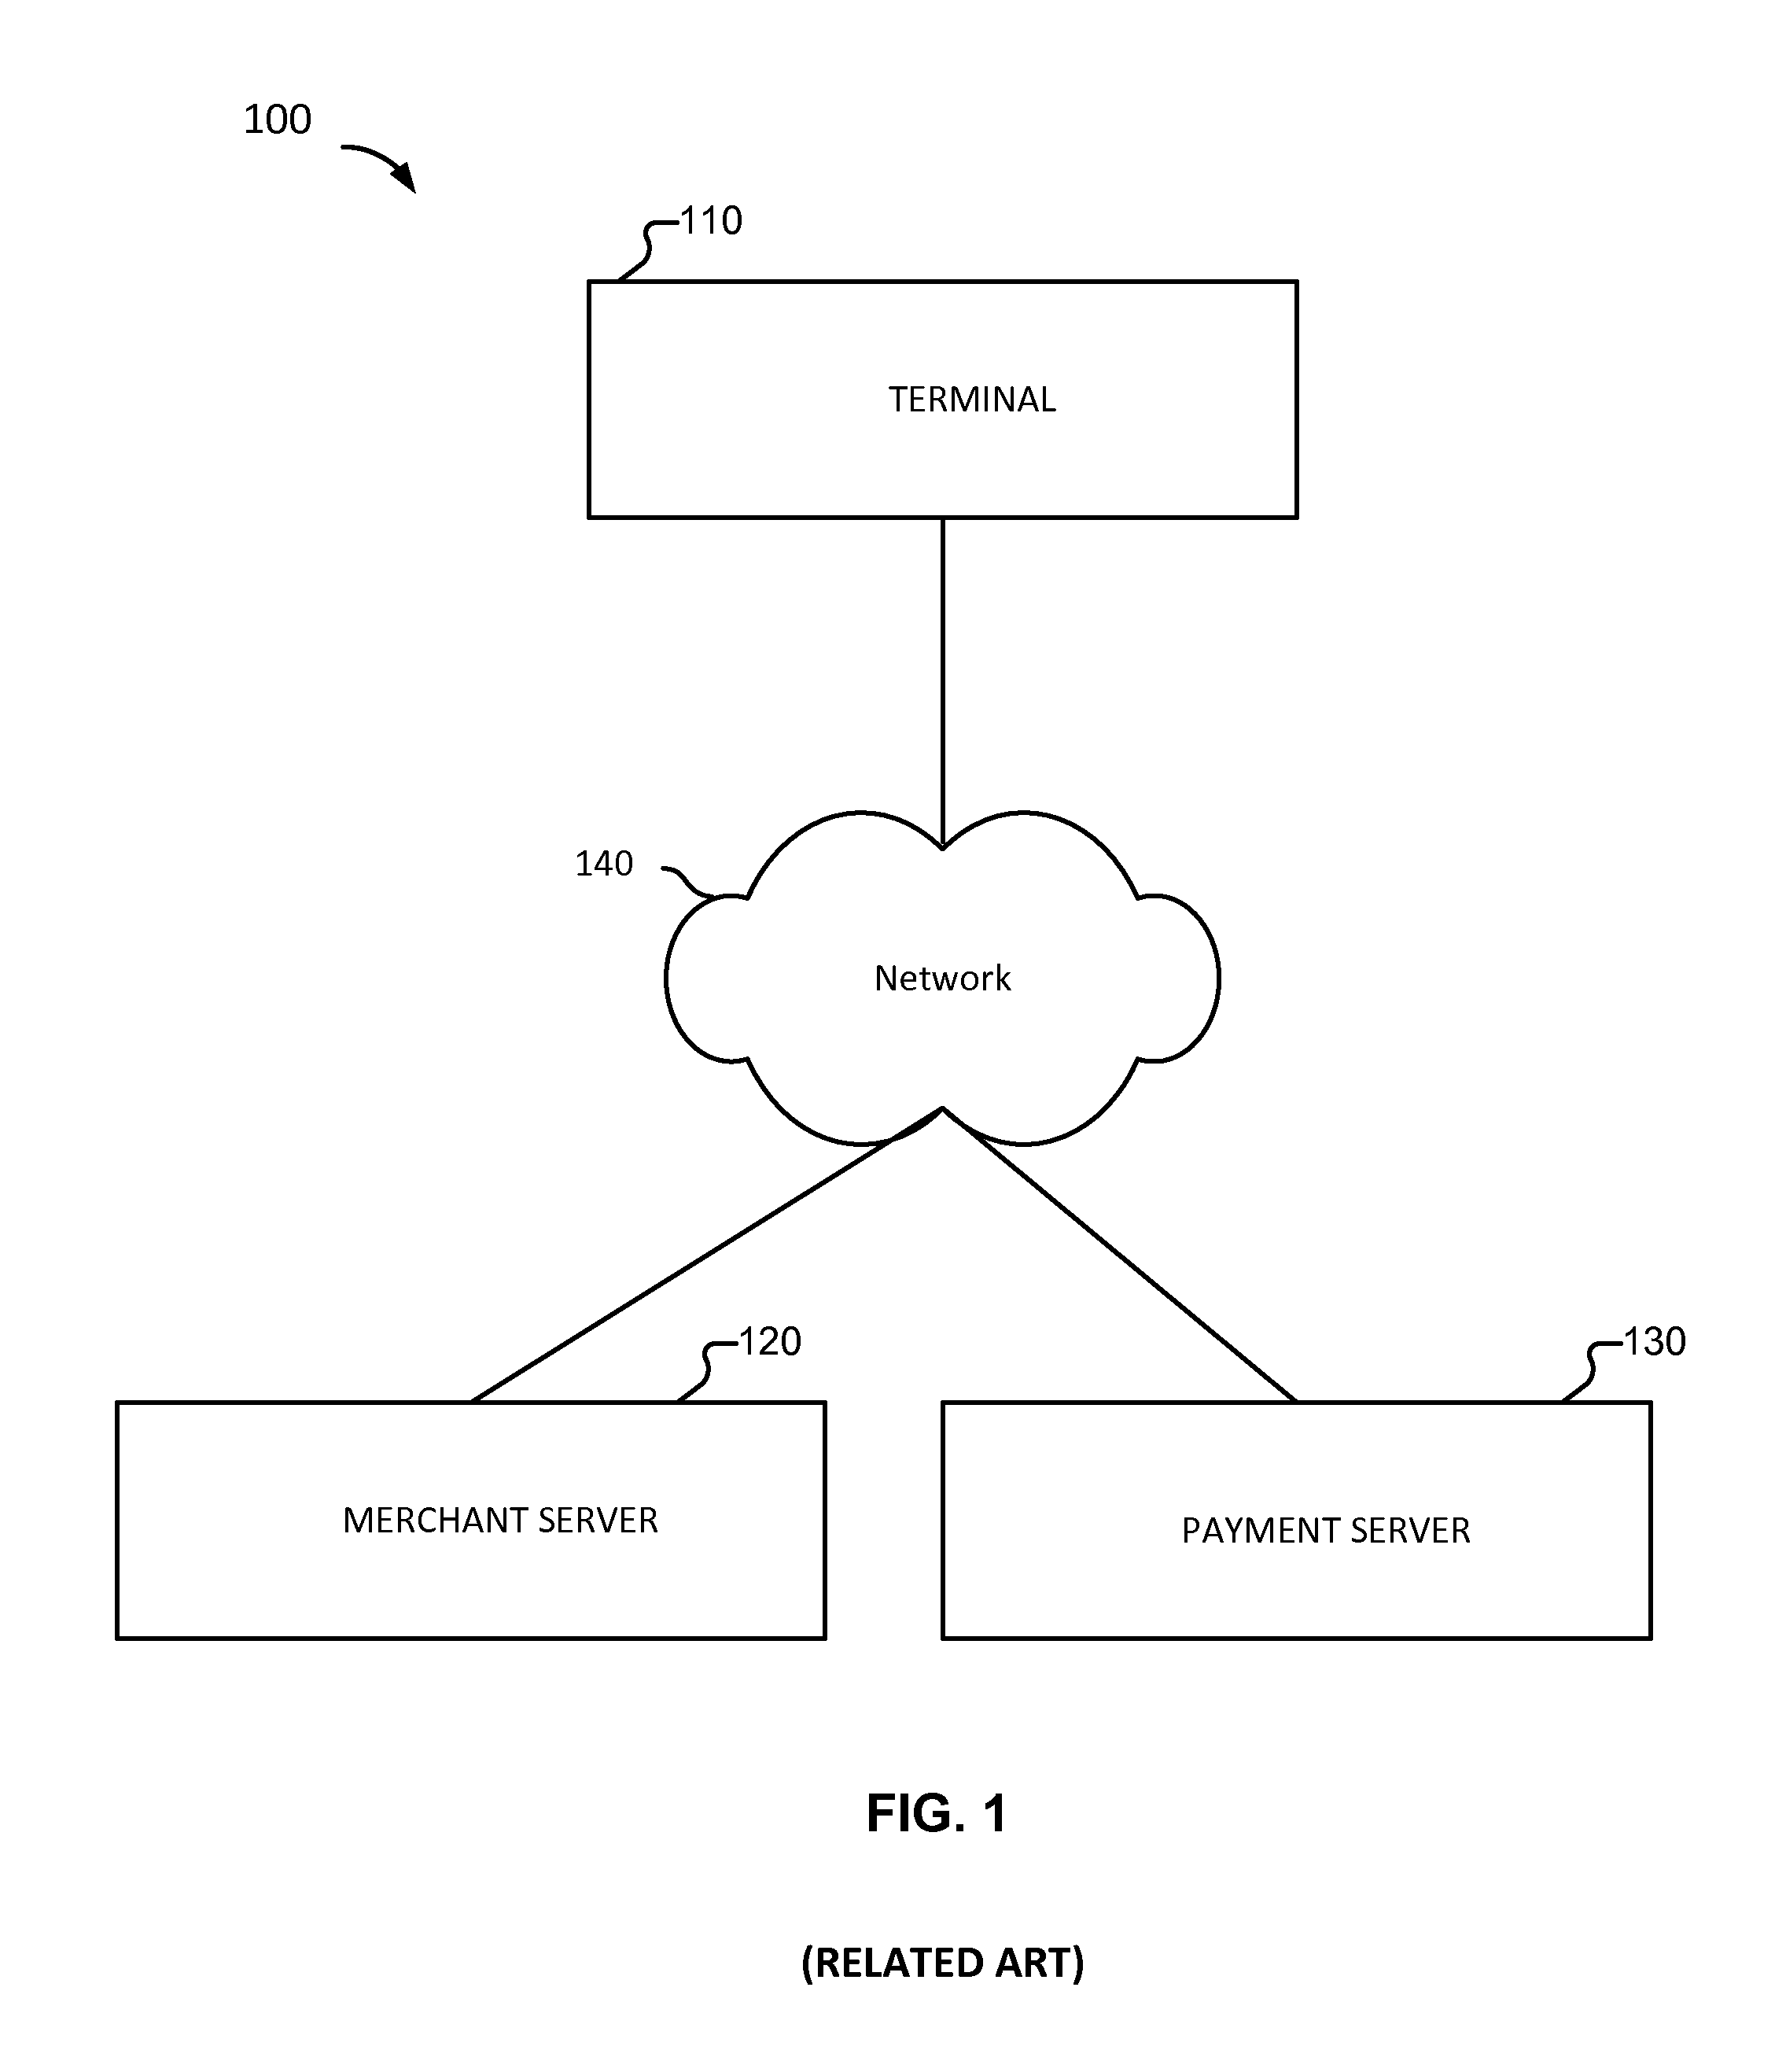 Processing electronic payments using at least two payment tools for a transaction